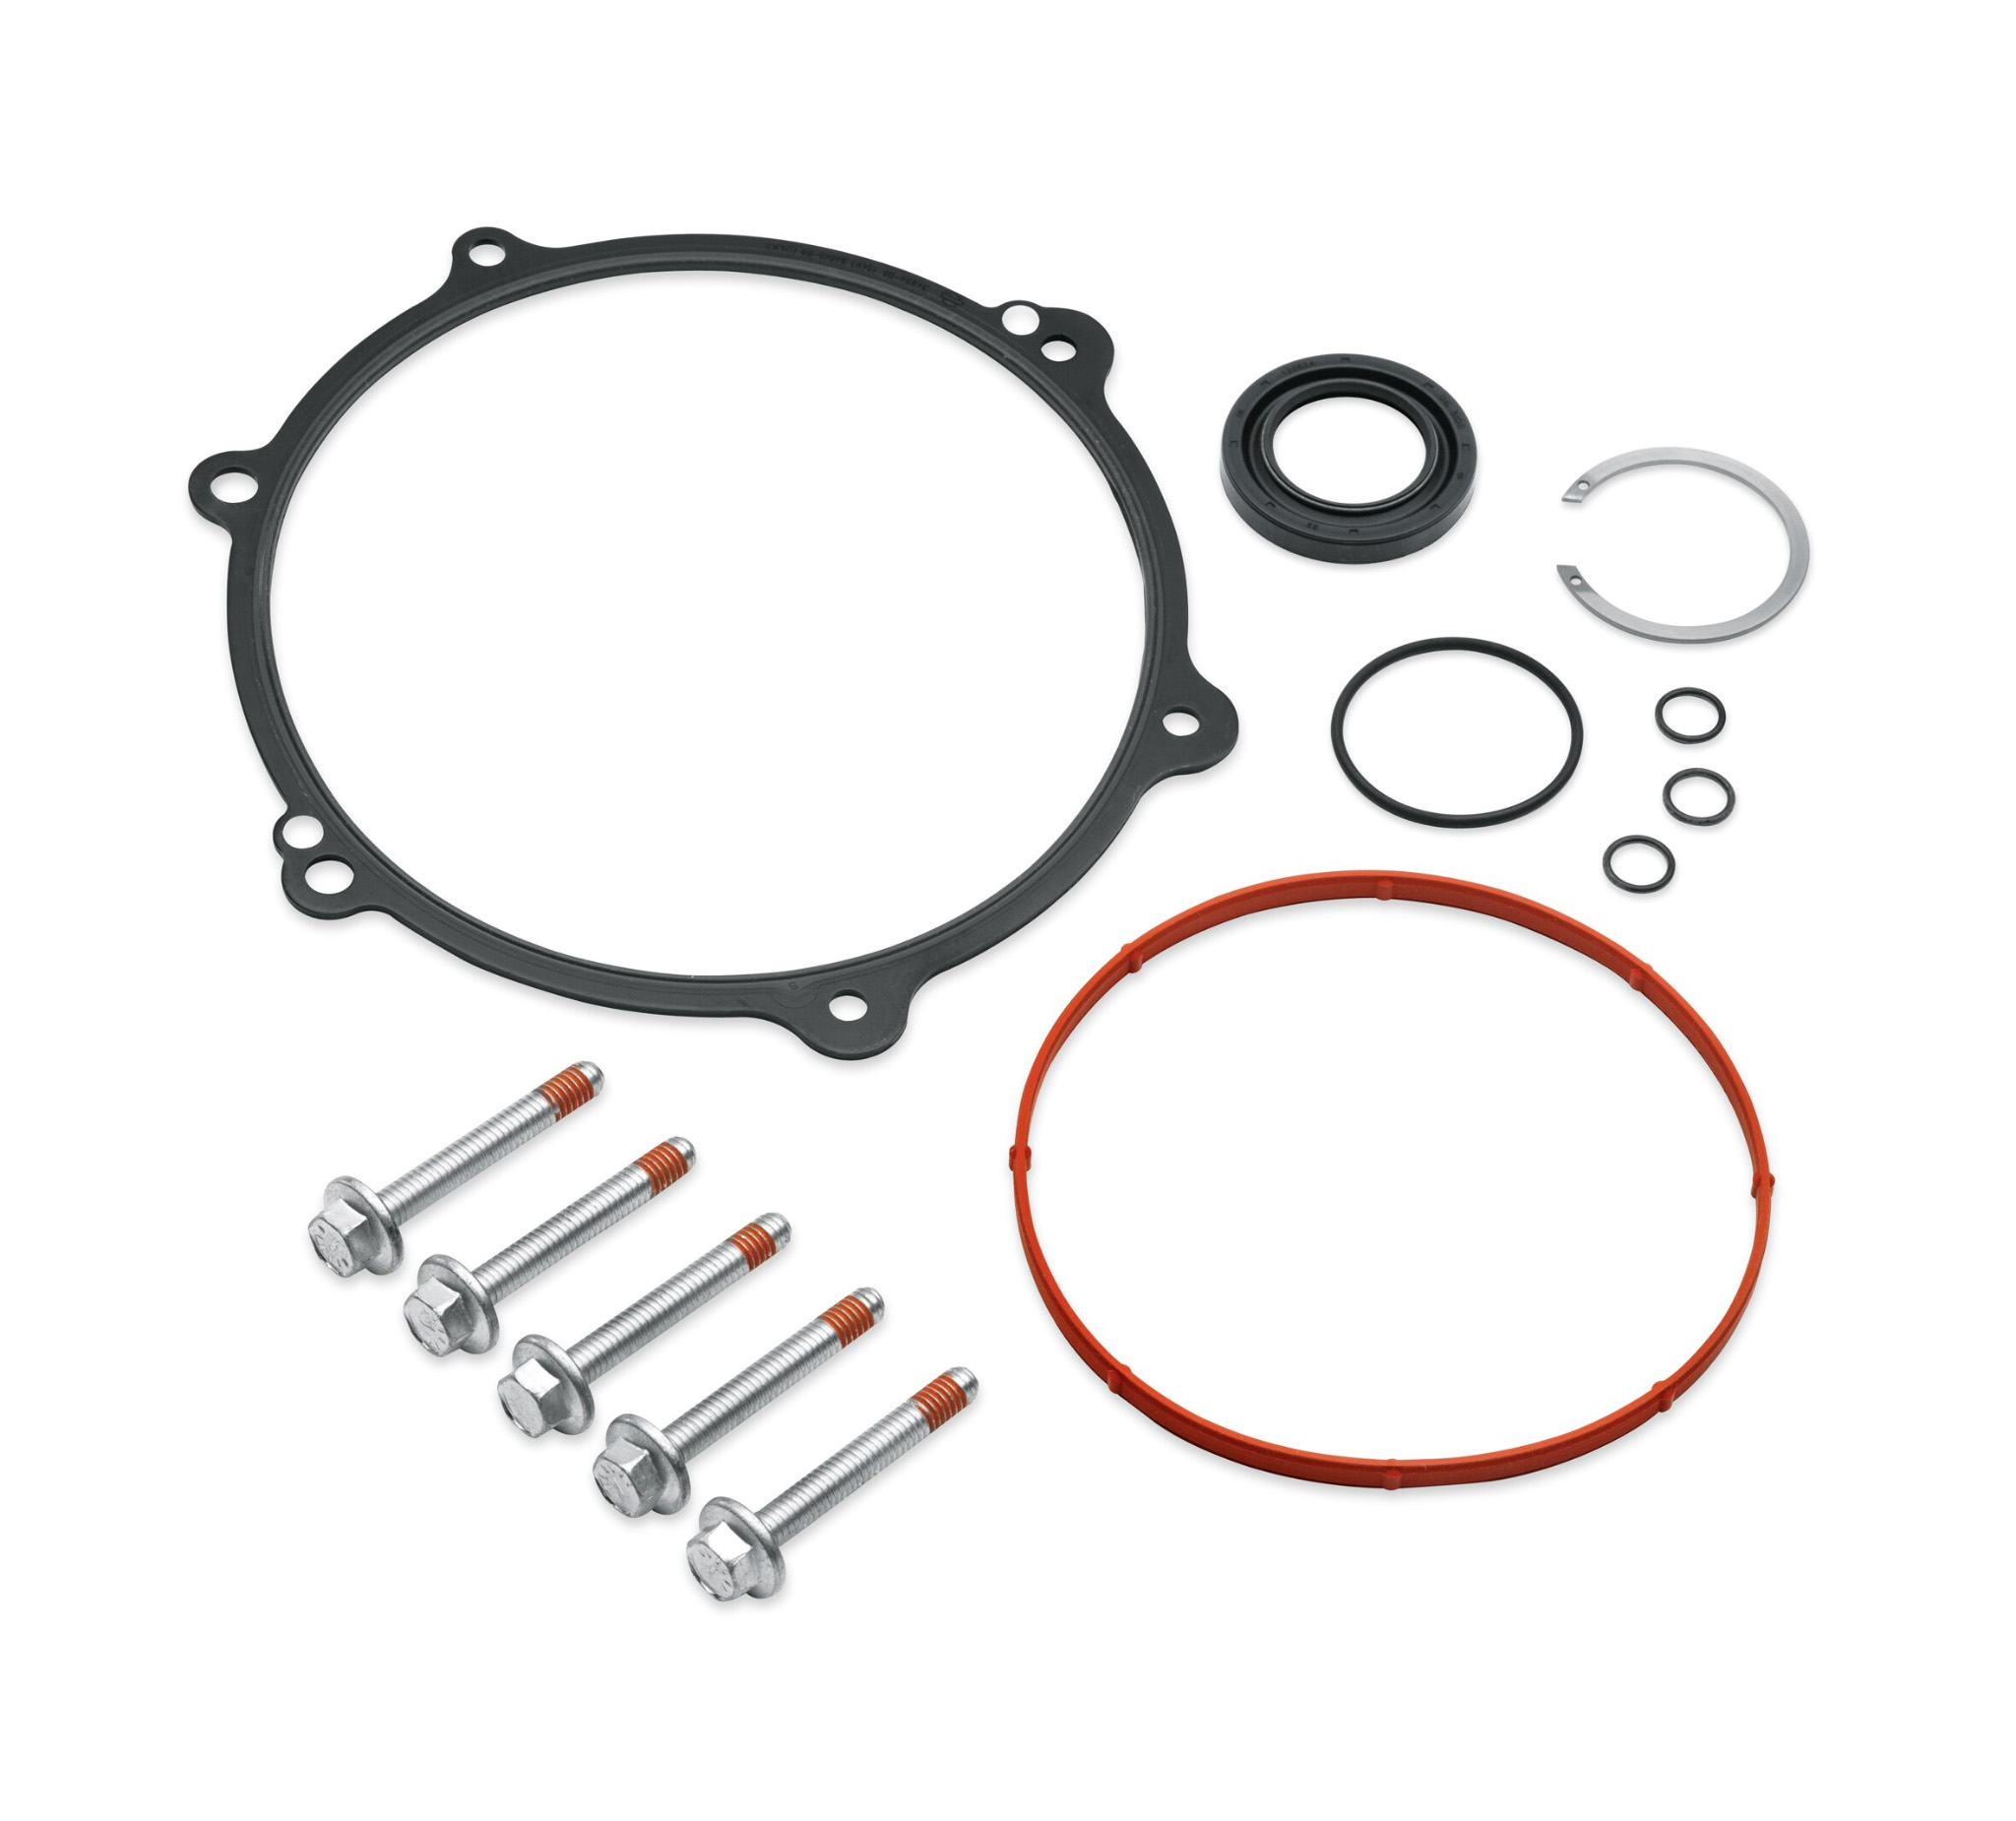 V-Twin Primary Gasket Kit for Harley Davidson Fatboy by V-Twin